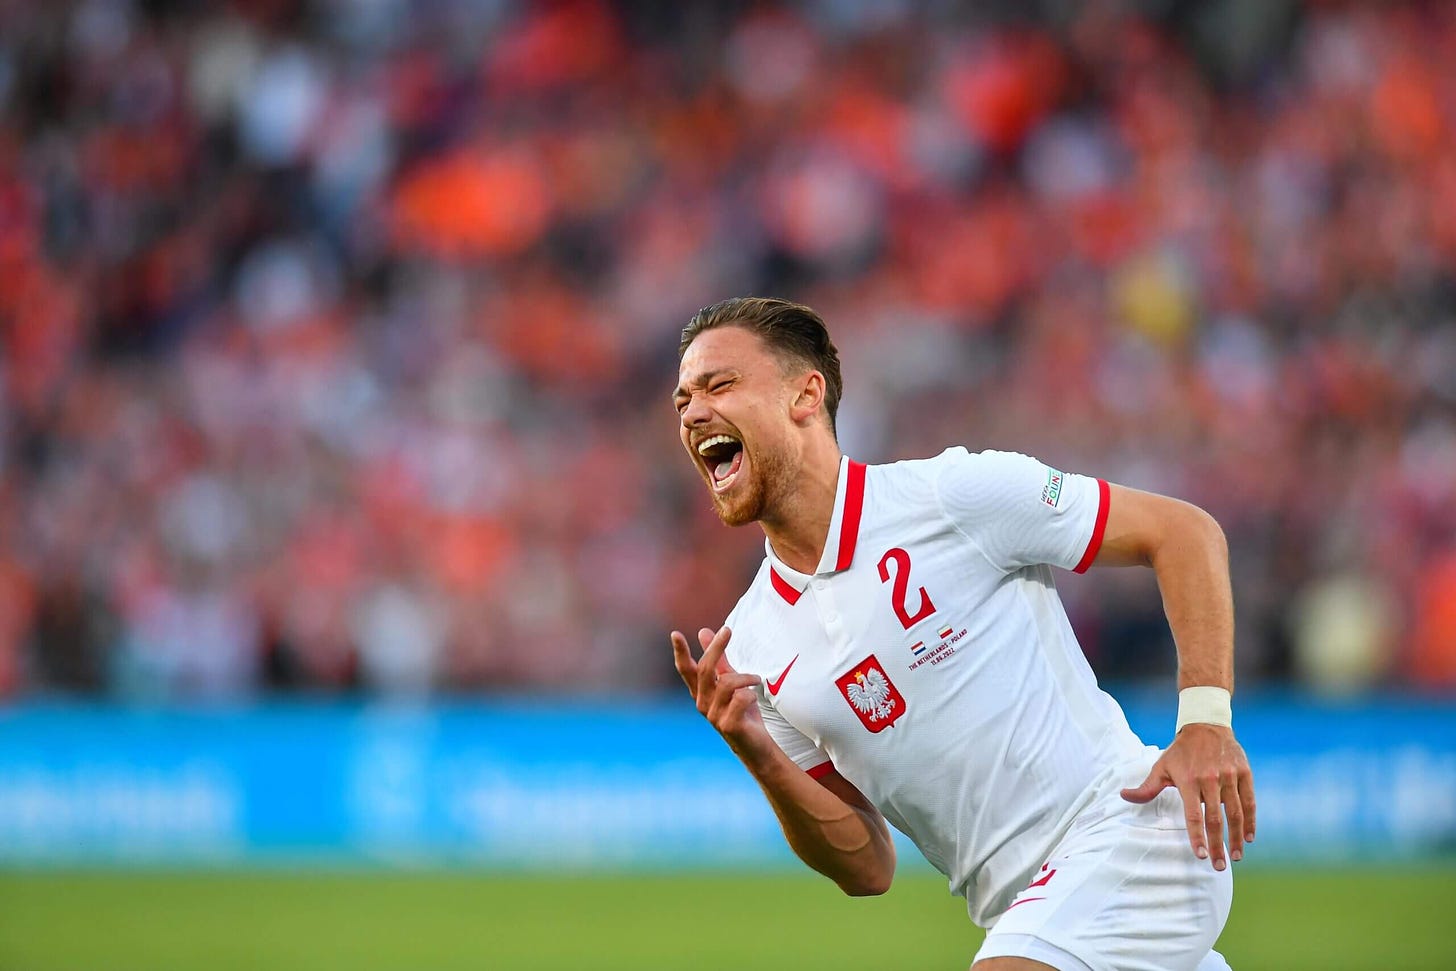 Matty Cash and his journey to represent Poland at the World Cup: 'Give me  vodka!' - The Athletic